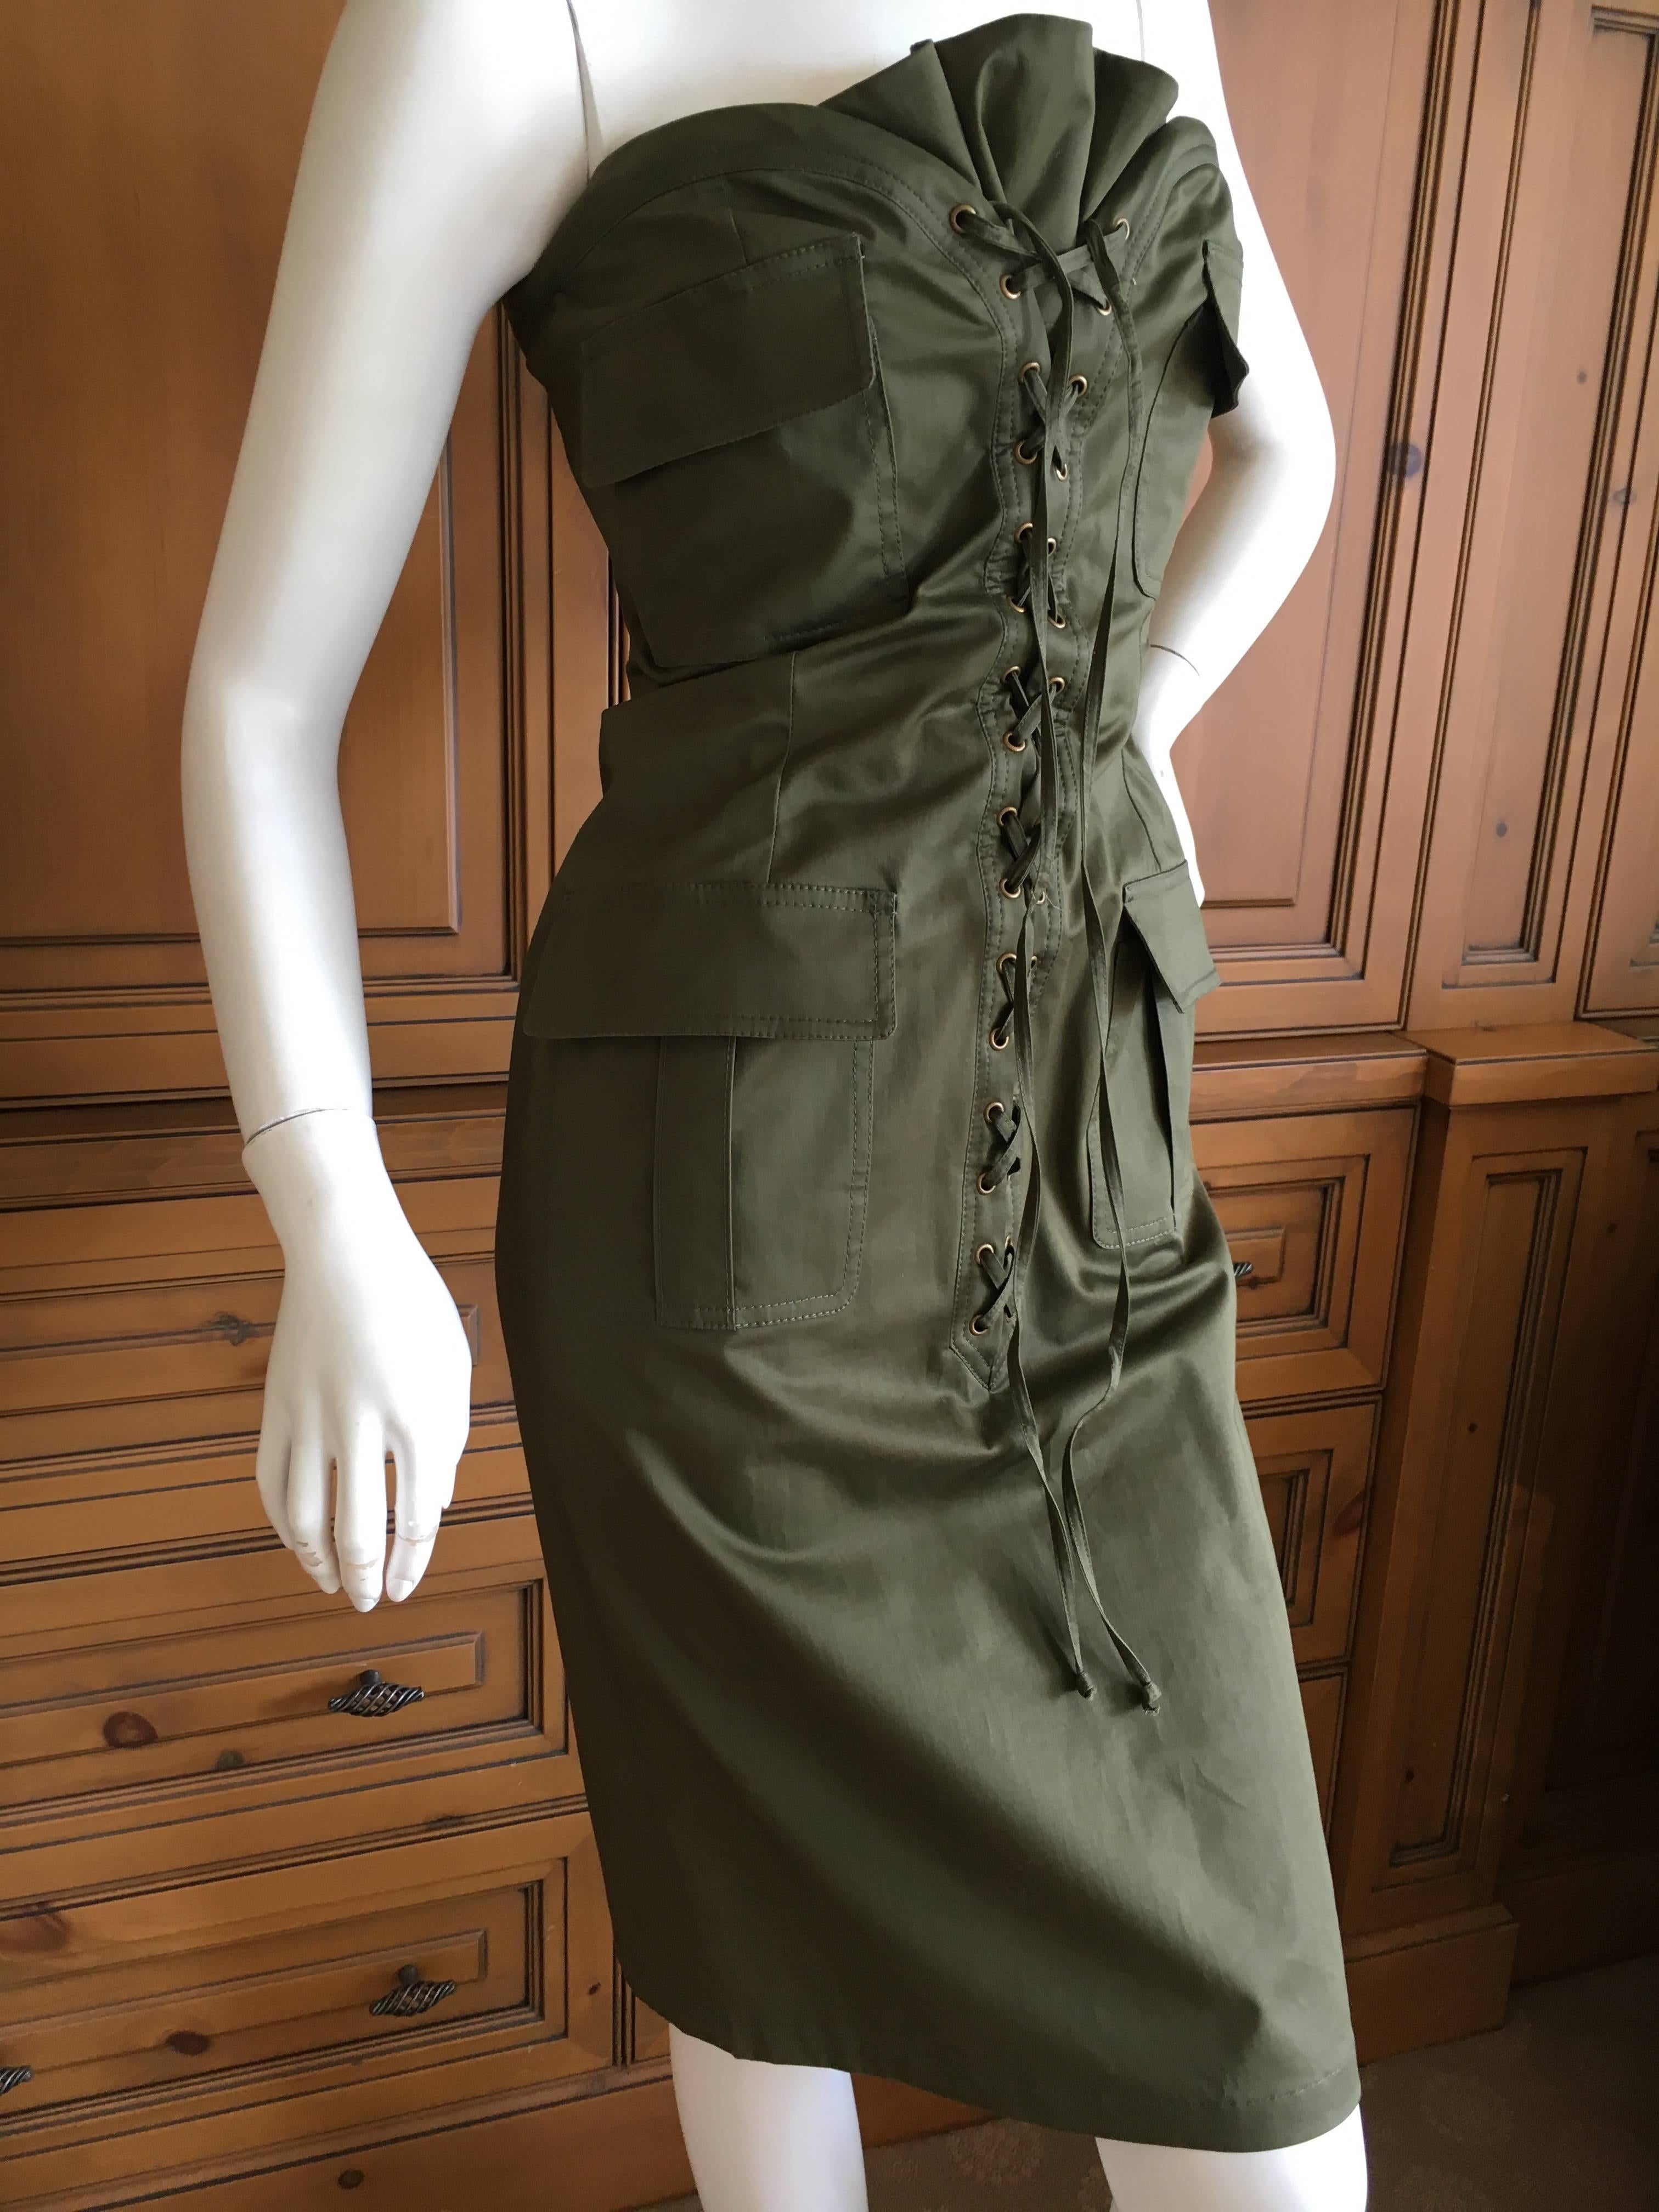 Yves Saint Laurent by Tom Ford Strapless Safari Dress with Corset Lacing For Sale 3